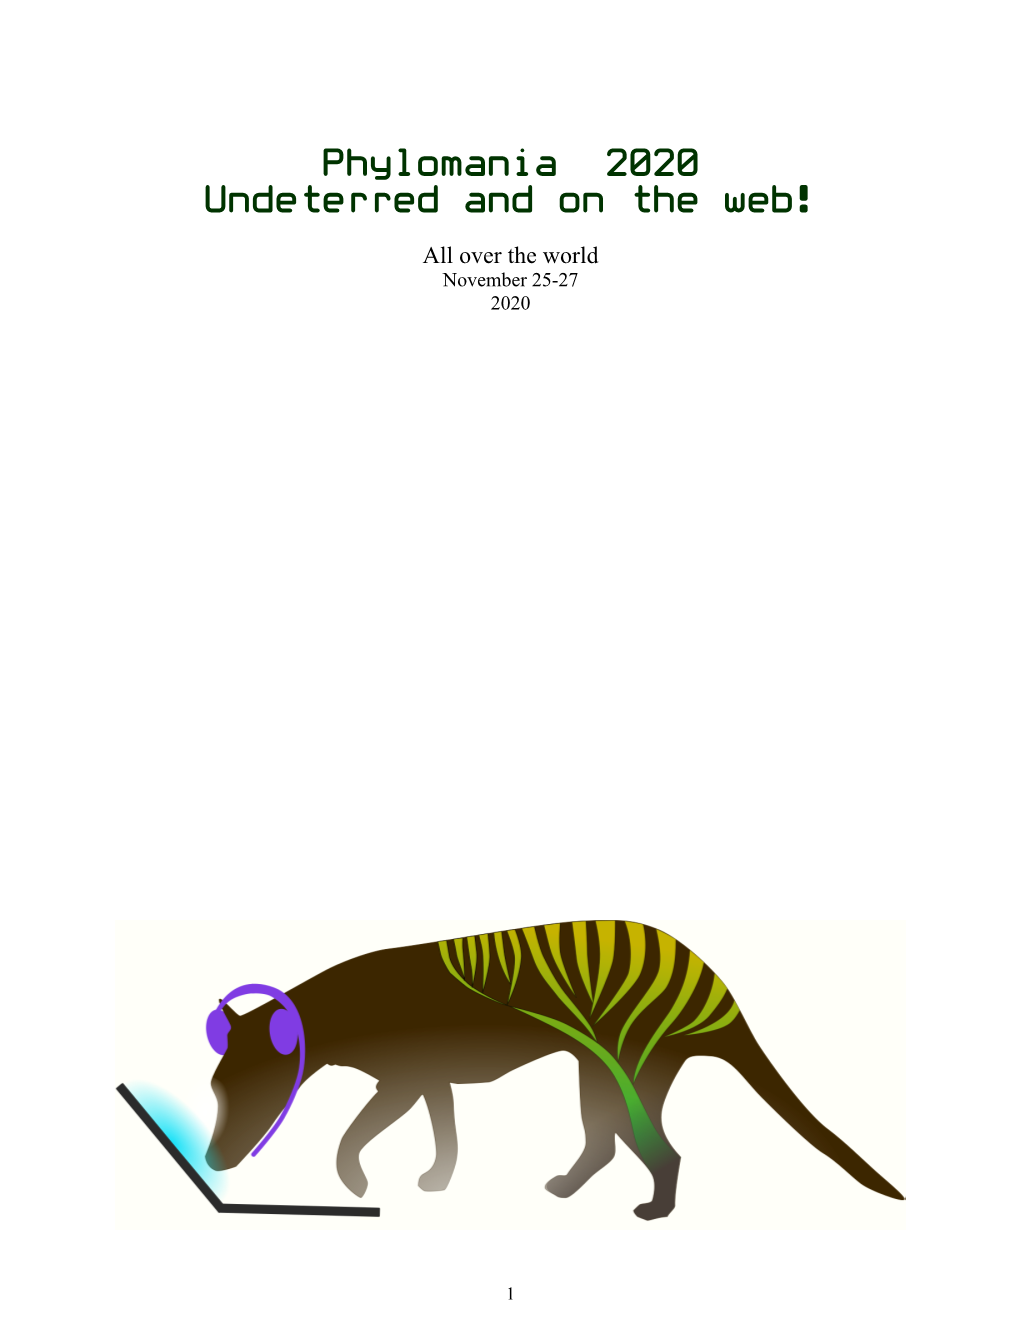 Phylomania 2020 Undeterred and on the Web!